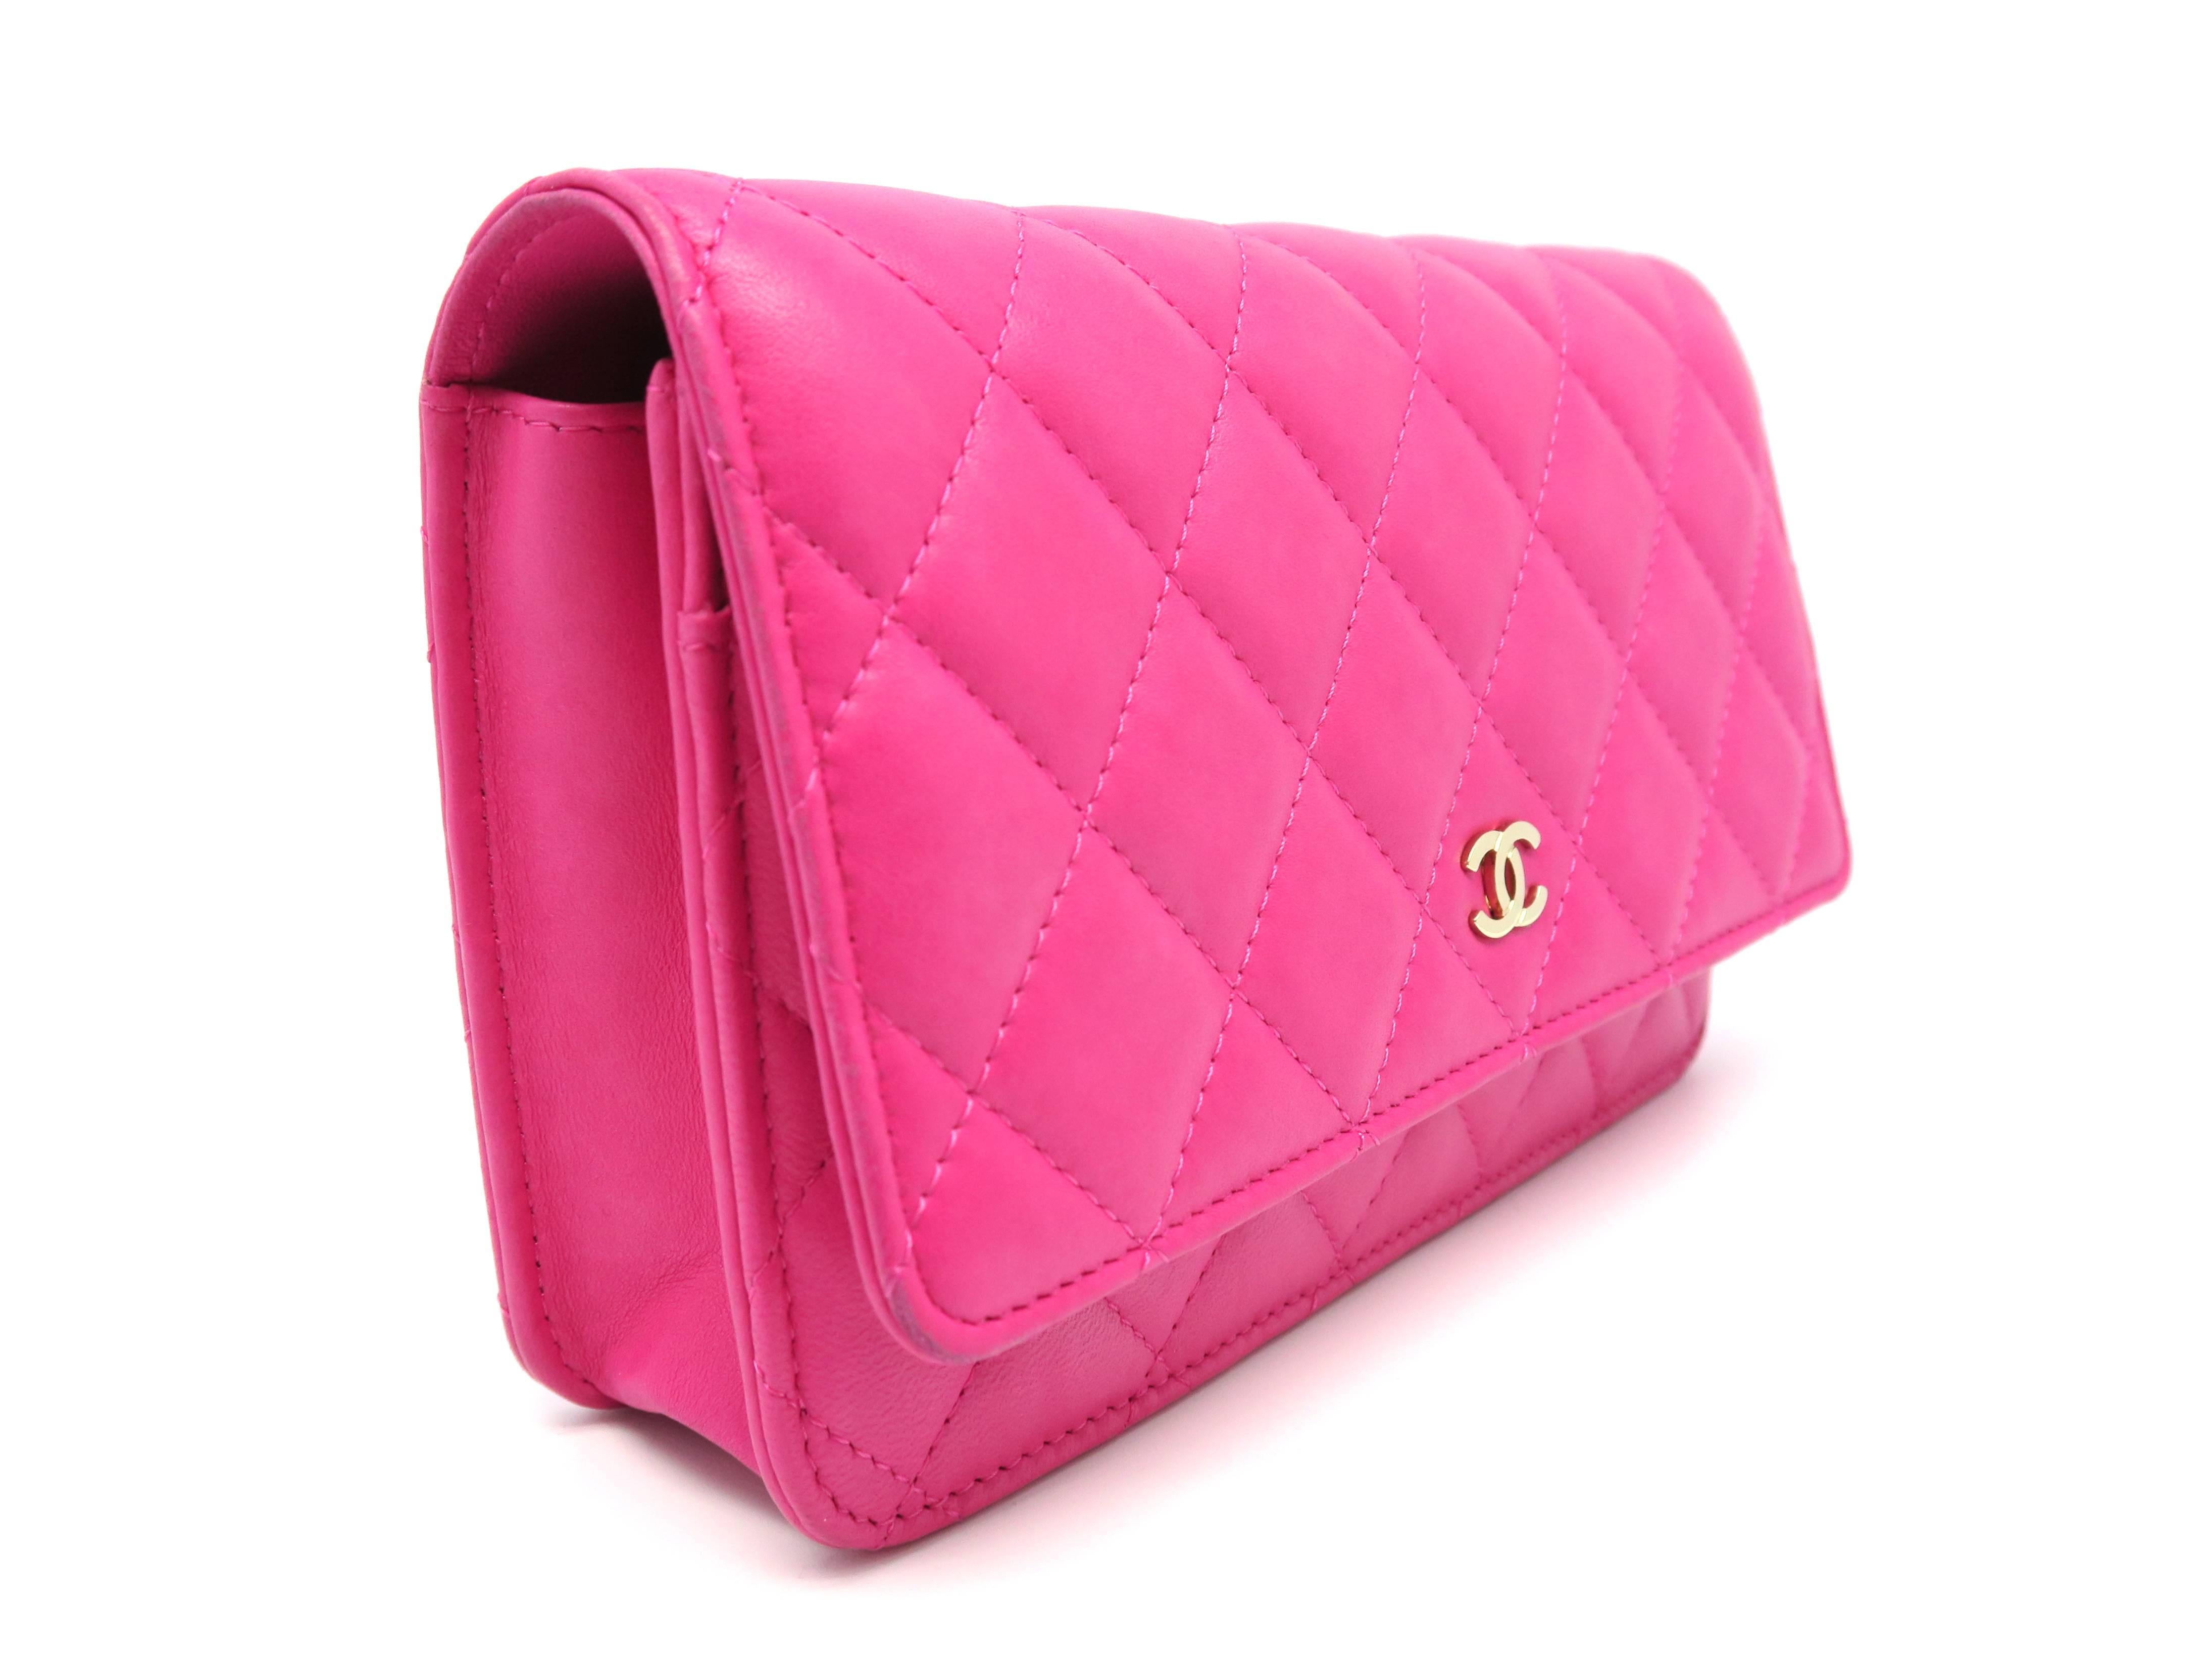 Color: Pink

Material: Quilted Lambskin Leather 

Condition: Rank A
Overall: Good, few minor defects
Surface: Minor Scratches & Stains
Corners: Minor Scratches & Stains
Edges: Minor Scratches & Stains
Handles/Straps: Good
Hardware: Minor